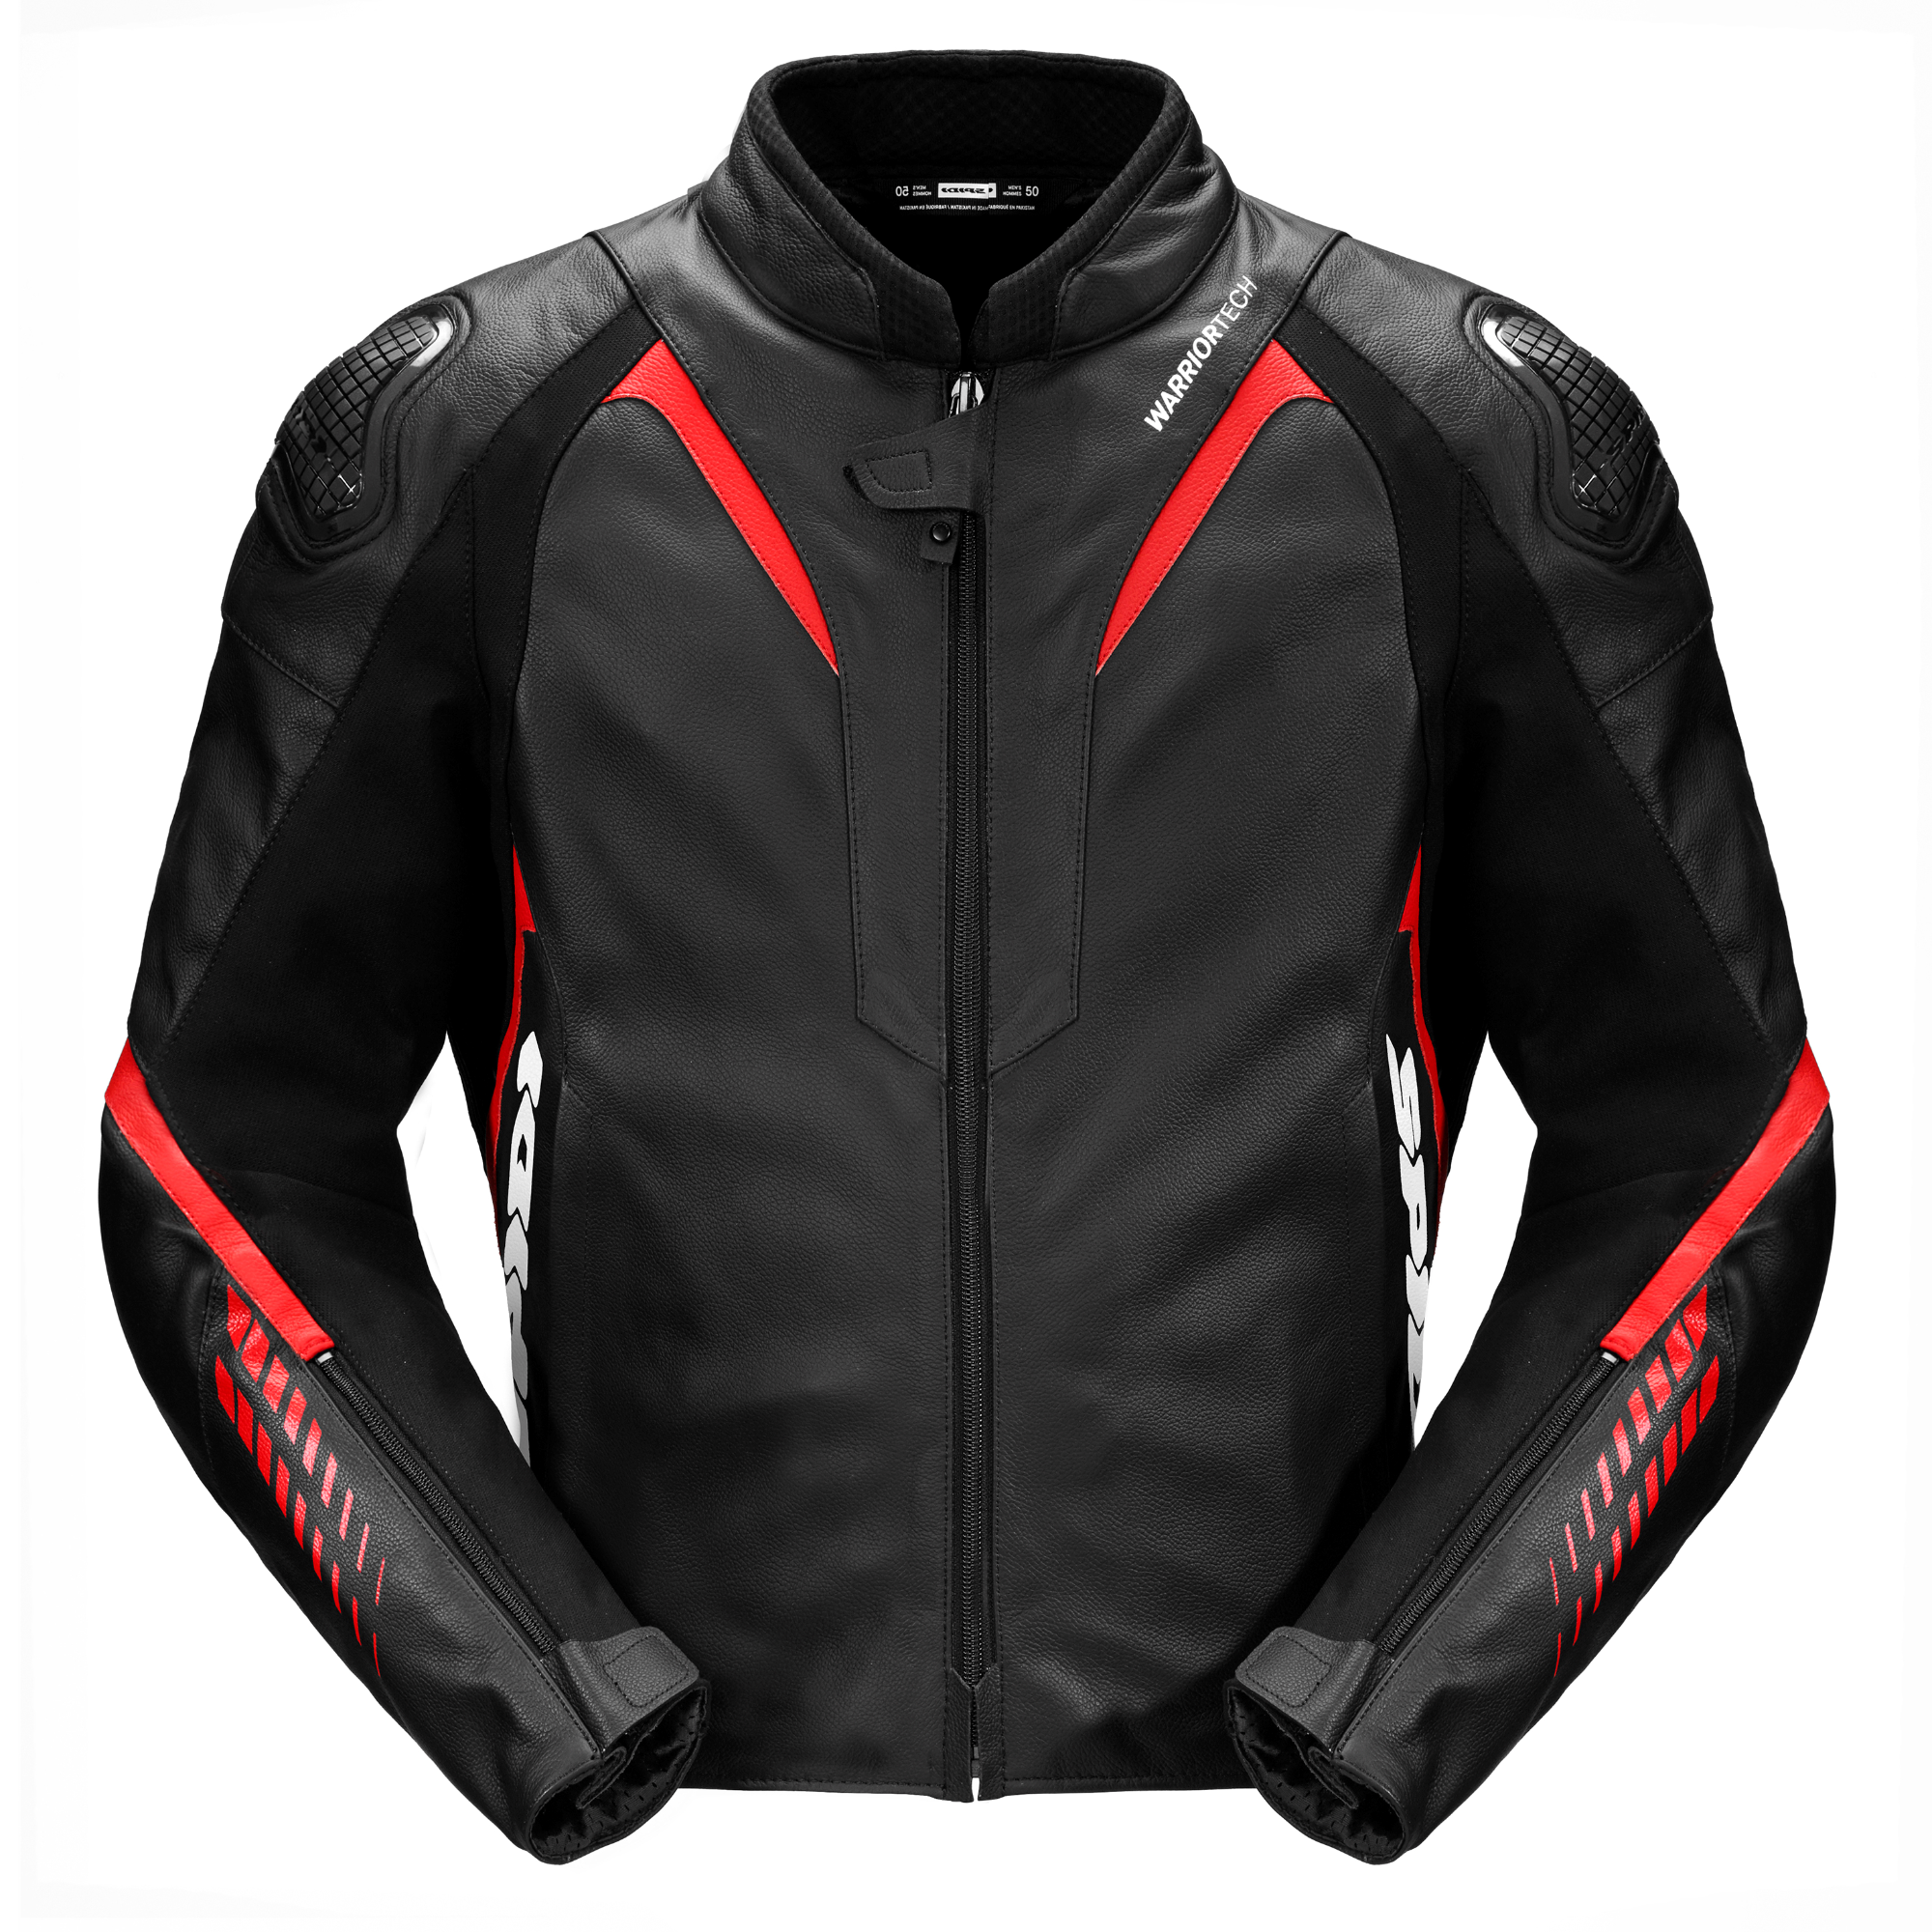 Image of Spidi Nkd-1 Jacket Red Size 52 ID 8030161461770